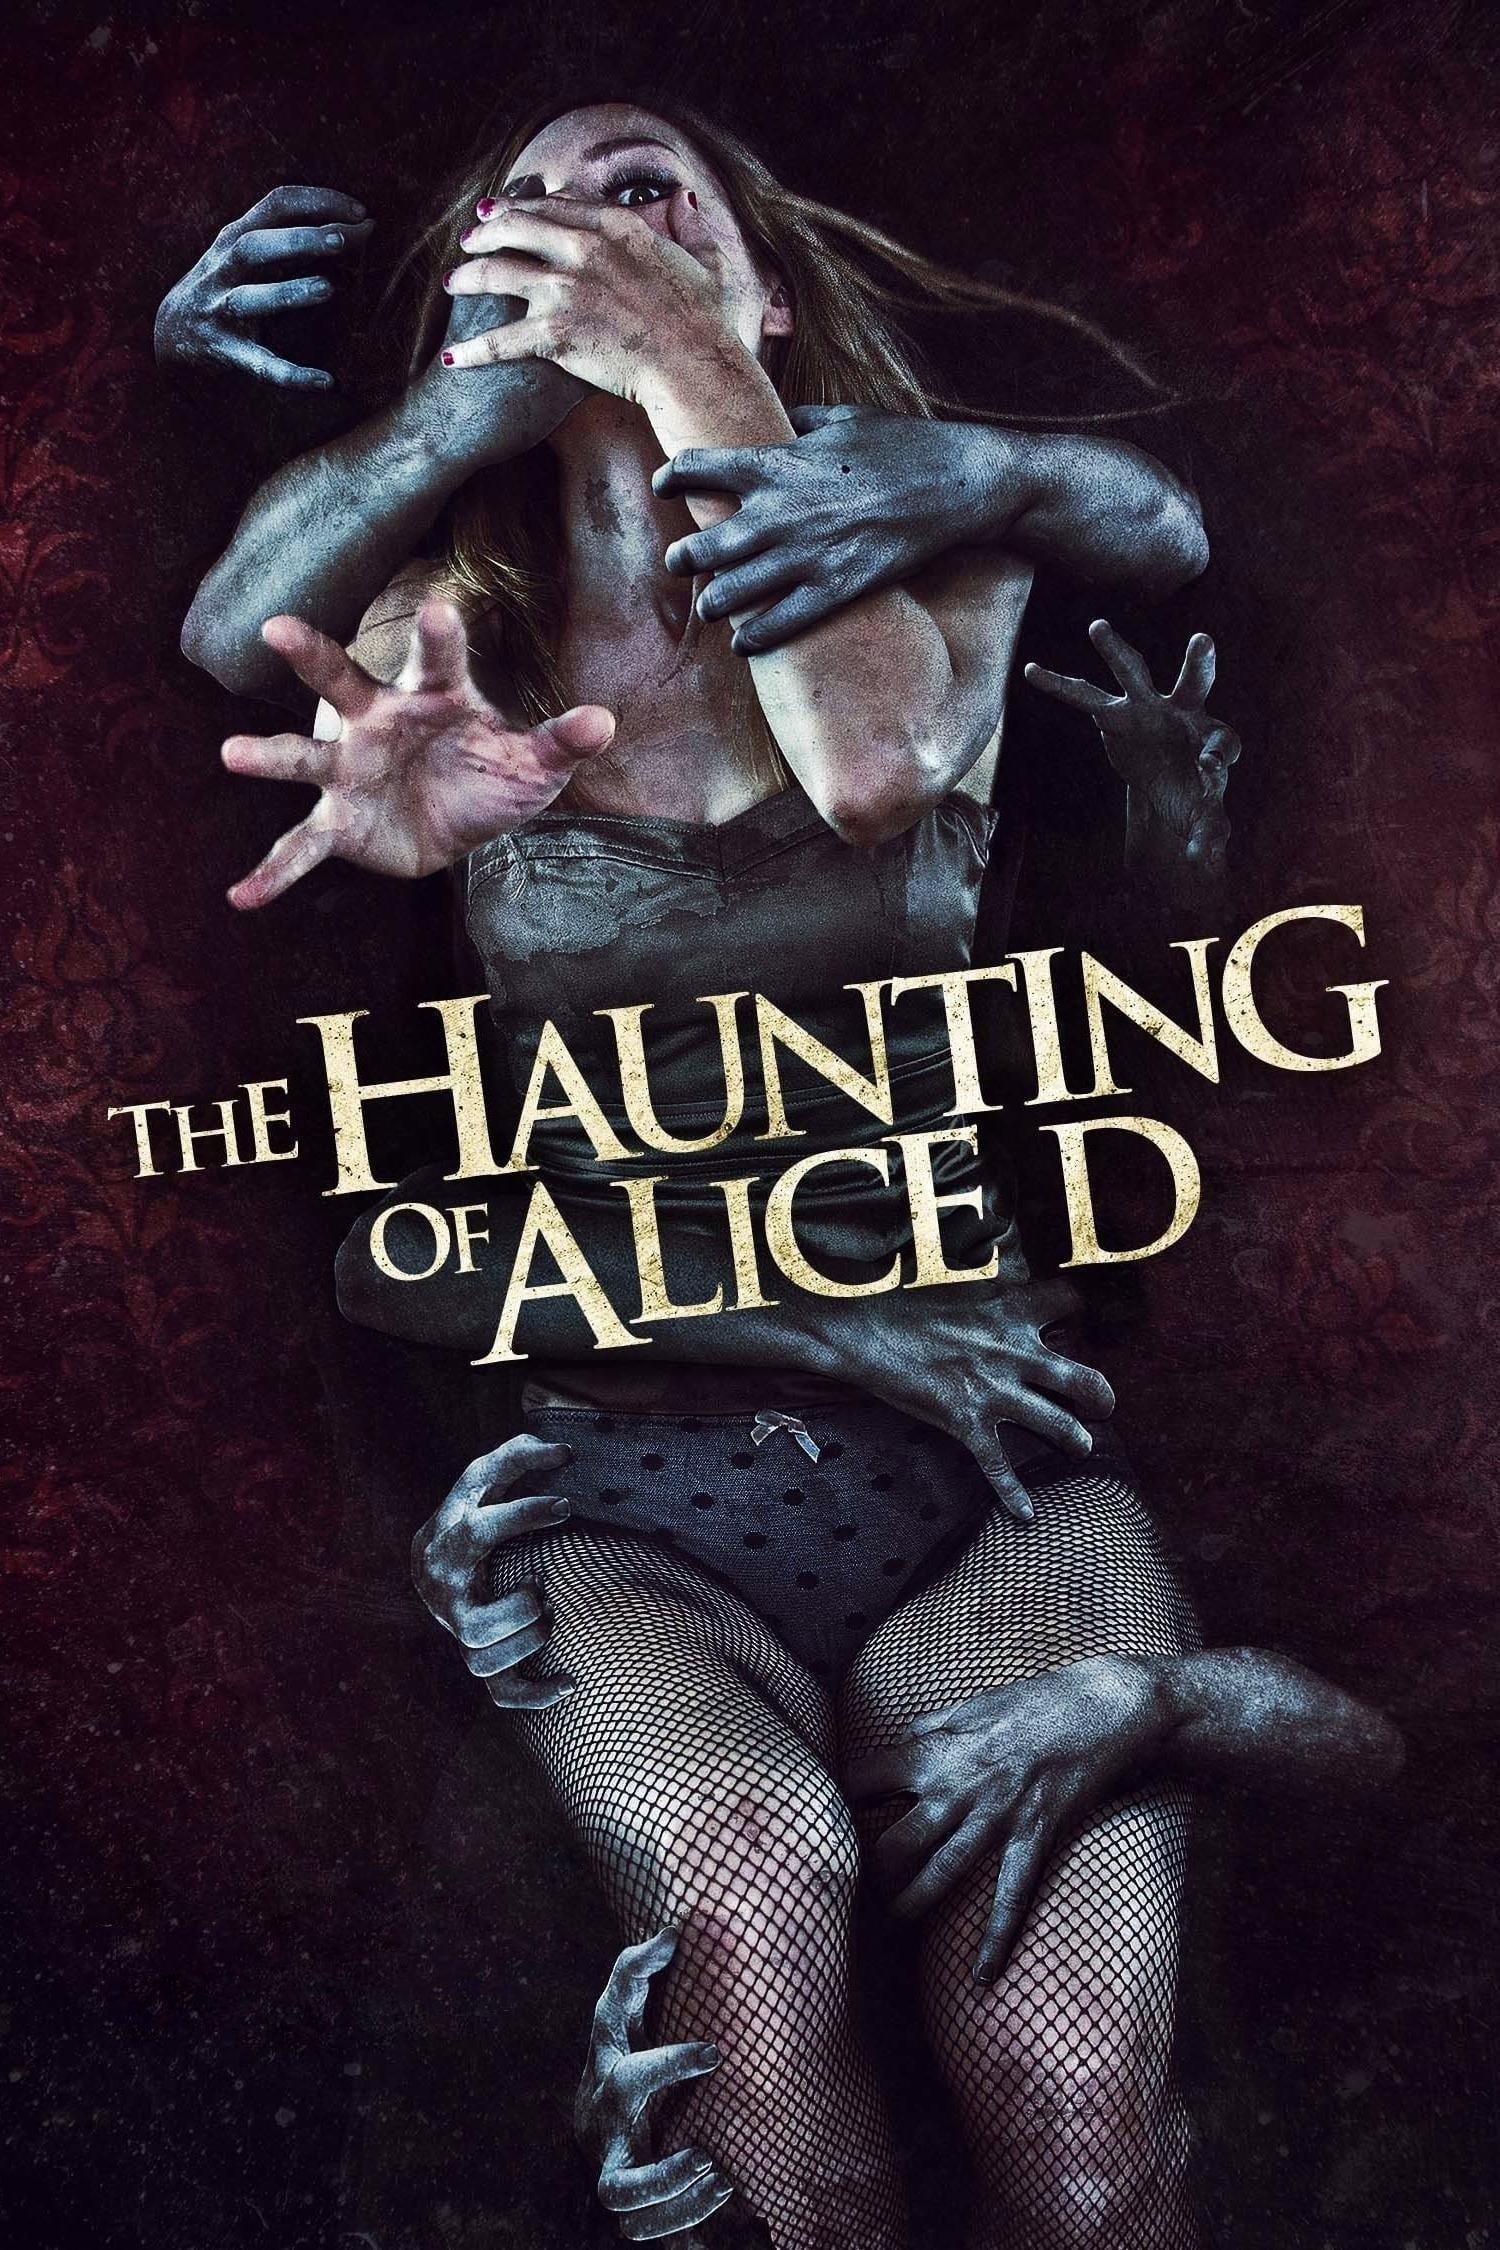 The Haunting of Alice D poster